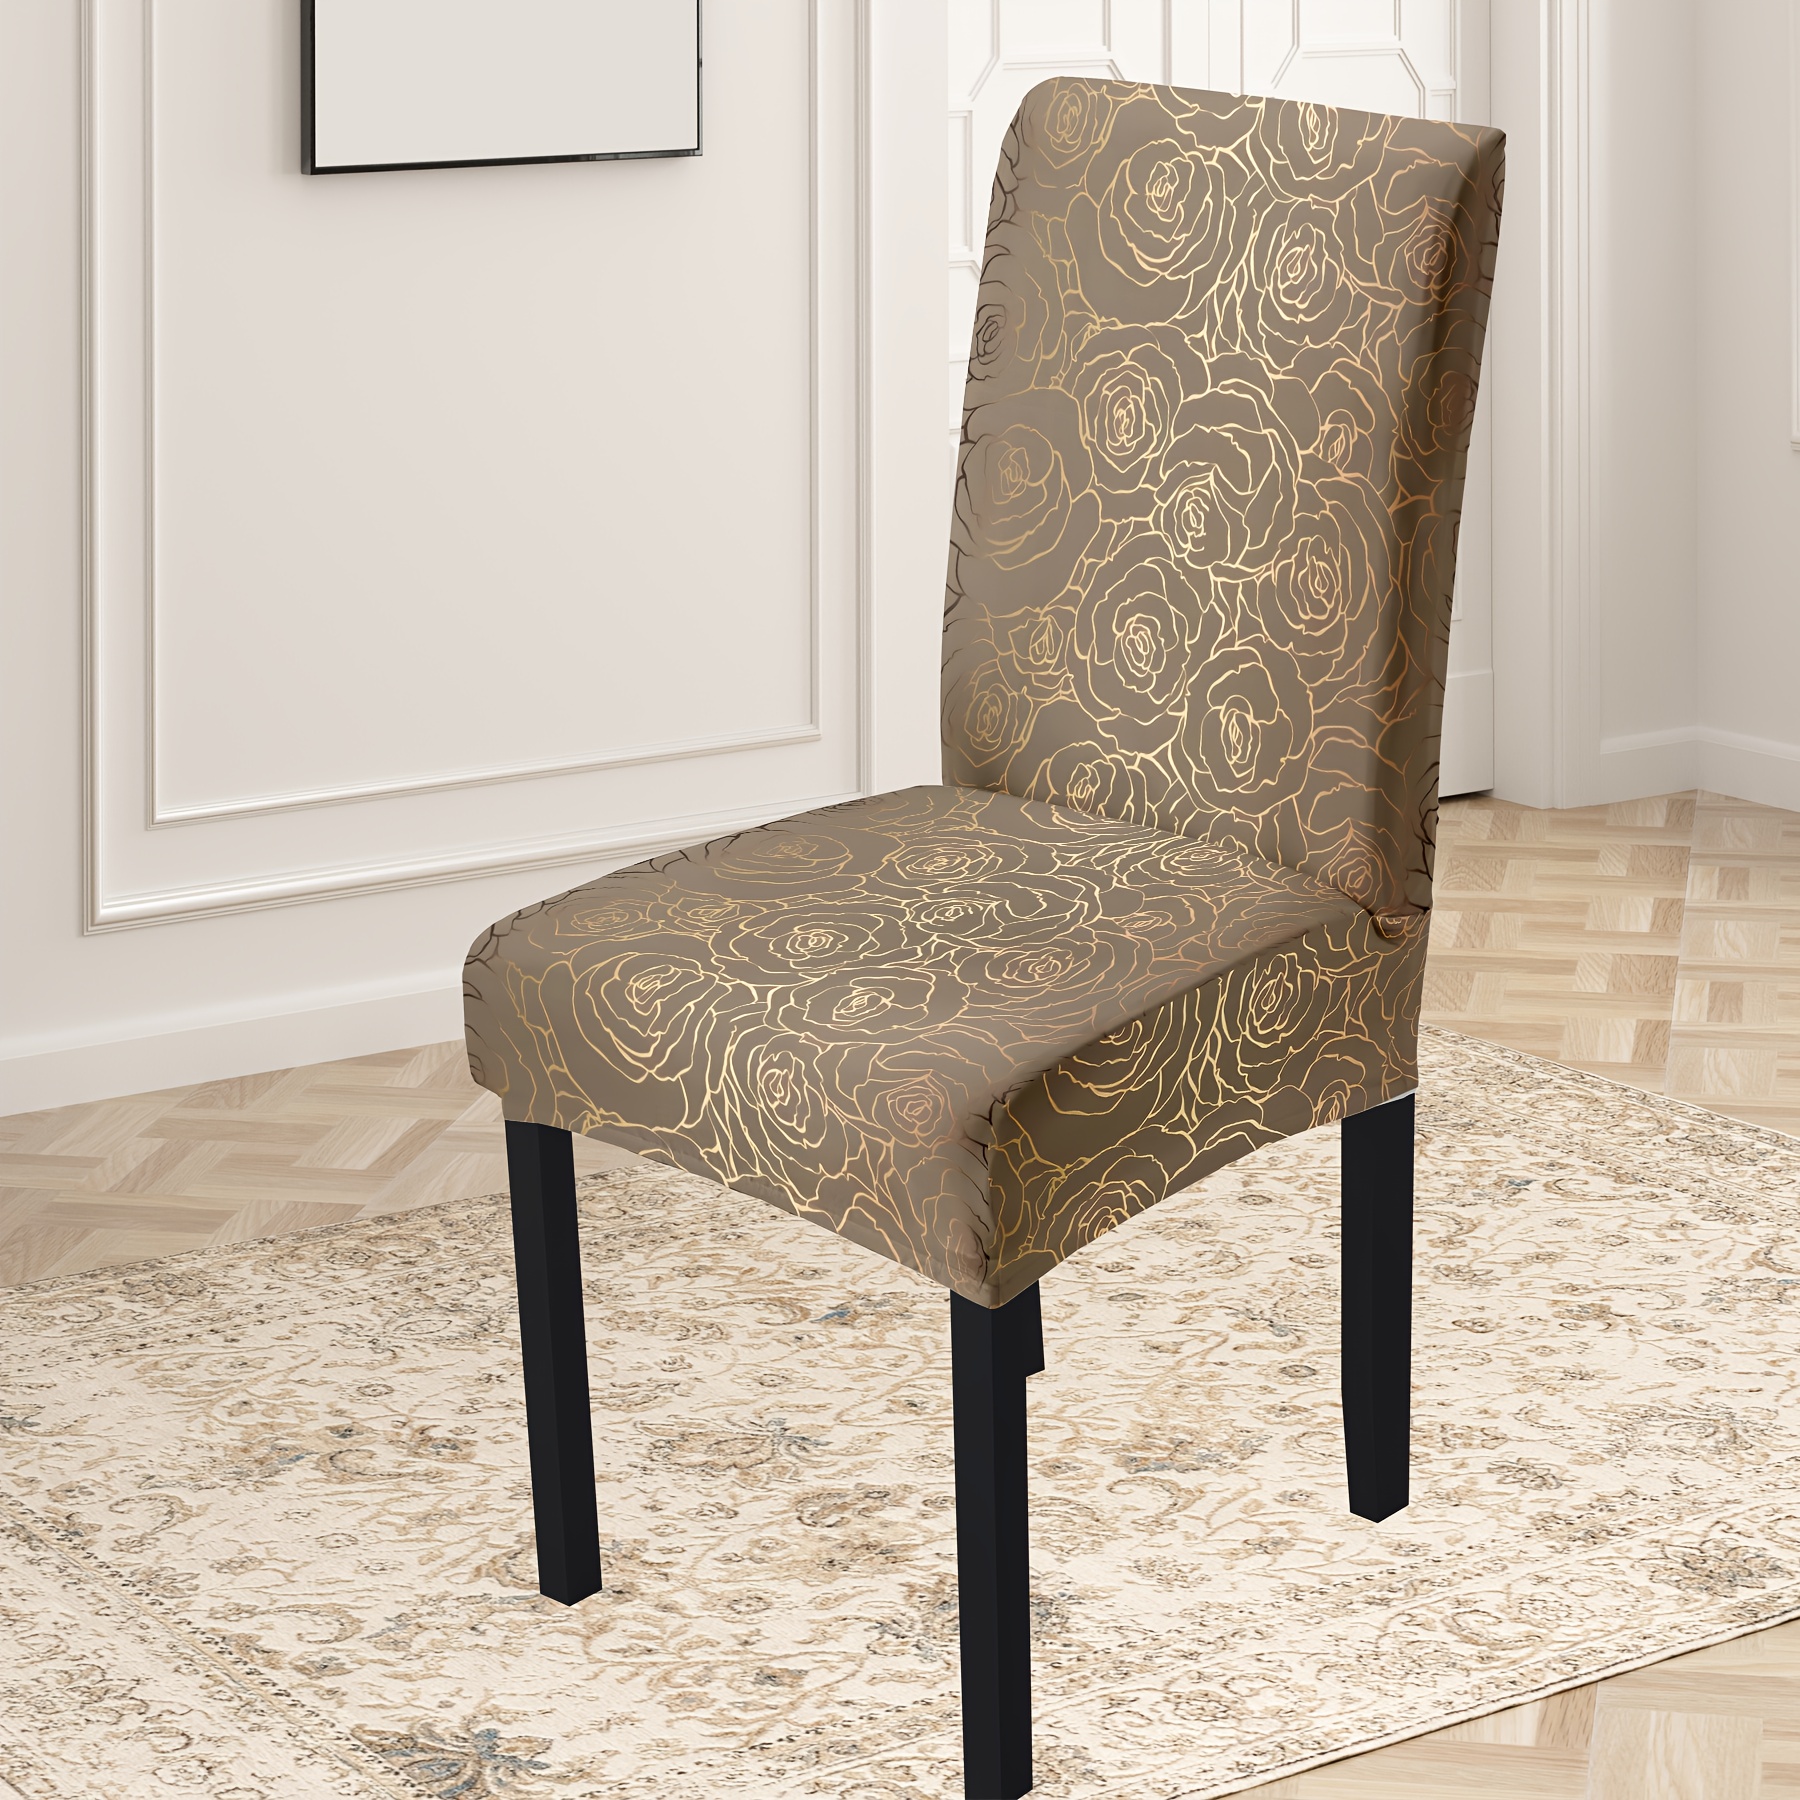 

Elegant Golden Rose Print Chair Covers - 4/6 Piece, High Stretch Polyester Slipcovers Toward Dining & Garden Chairs, Machine Washable, Perfect Toward Home, Hotels - Dustproof & Durable